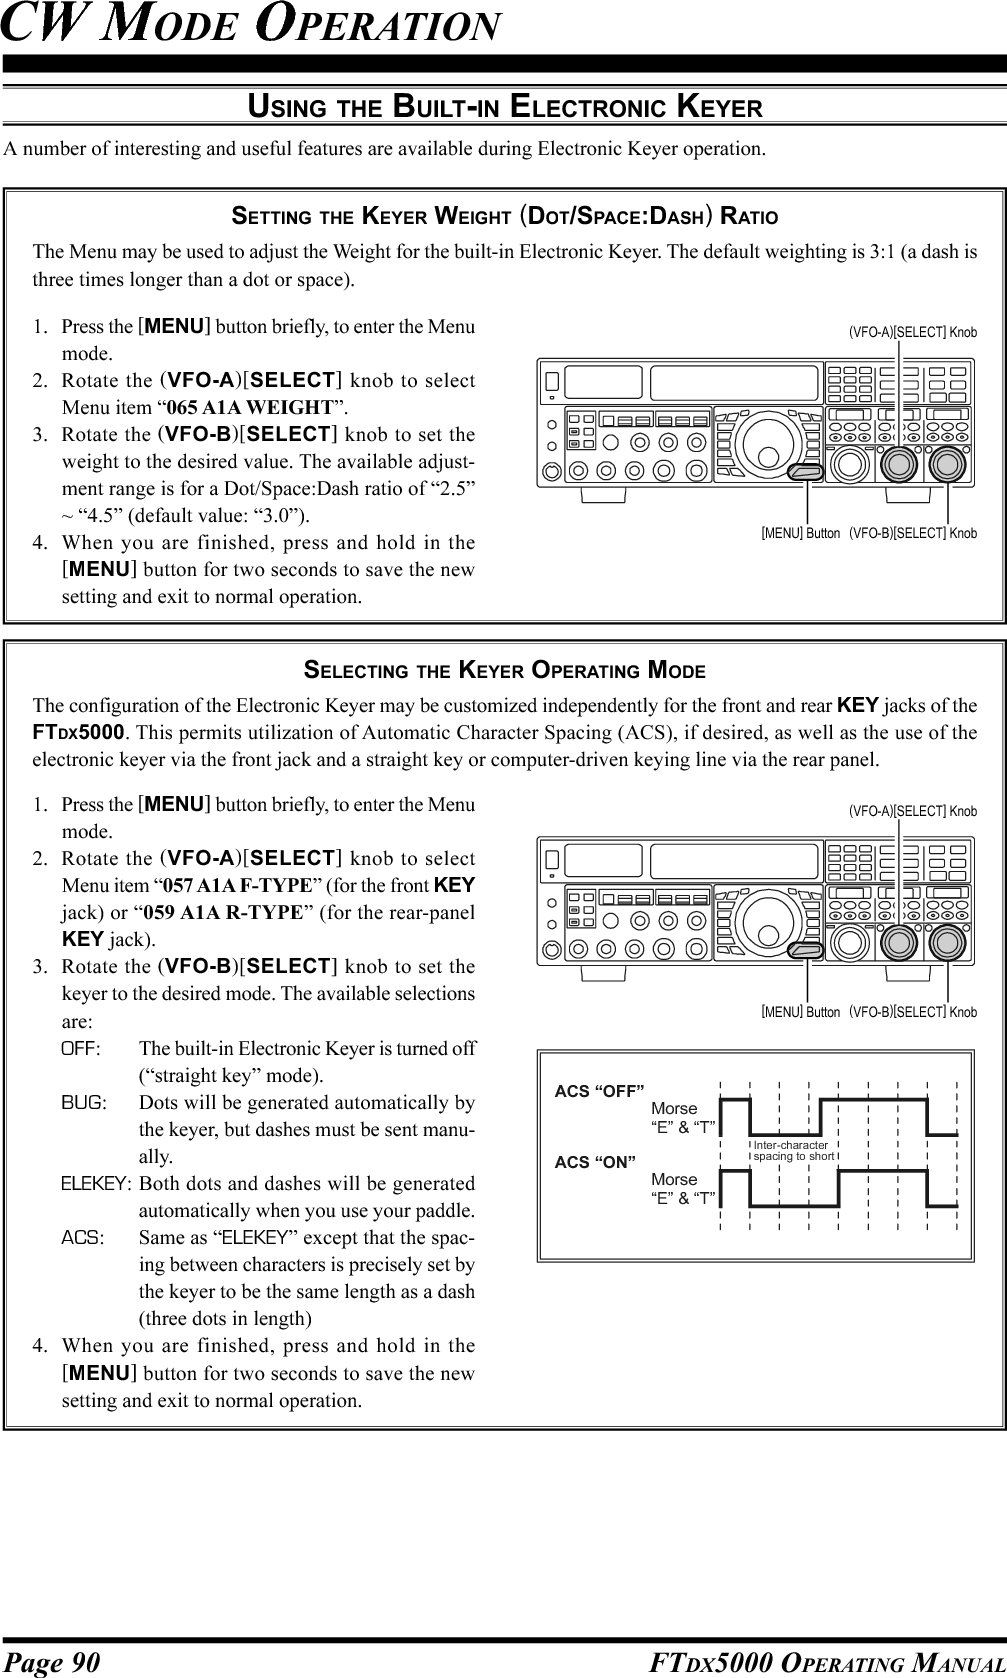 Page 90 FTDX5000 OPERATING MANUALA number of interesting and useful features are available during Electronic Keyer operation.SETTING THE KEYER WEIGHT (DOT/SPACE:DASH) RATIOThe Menu may be used to adjust the Weight for the built-in Electronic Keyer. The default weighting is 3:1 (a dash isthree times longer than a dot or space).USING THE BUILT-IN ELECTRONIC KEYERCW MODE OPERATION1. Press the [MENU] button briefly, to enter the Menumode.2. Rotate the (VFO-A)[SELECT] knob to selectMenu item “065 A1A WEIGHT”.3. Rotate the (VFO-B)[SELECT] knob to set theweight to the desired value. The available adjust-ment range is for a Dot/Space:Dash ratio of “2.5”~ “4.5” (default value: “3.0”).4. When you are finished, press and hold in the[MENU] button for two seconds to save the newsetting and exit to normal operation.SELECTING THE KEYER OPERATING MODEThe configuration of the Electronic Keyer may be customized independently for the front and rear KEY jacks of theFTDX5000. This permits utilization of Automatic Character Spacing (ACS), if desired, as well as the use of theelectronic keyer via the front jack and a straight key or computer-driven keying line via the rear panel.1. Press the [MENU] button briefly, to enter the Menumode.2. Rotate the (VFO-A)[SELECT] knob to selectMenu item “057 A1A F-TYPE” (for the front KEYjack) or “059 A1A R-TYPE” (for the rear-panelKEY jack).3. Rotate the (VFO-B)[SELECT] knob to set thekeyer to the desired mode. The available selectionsare:OFF: The built-in Electronic Keyer is turned off(“straight key” mode).BUG: Dots will be generated automatically bythe keyer, but dashes must be sent manu-ally.ELEKEY: Both dots and dashes will be generatedautomatically when you use your paddle.ACS: Same as “ELEKEY” except that the spac-ing between characters is precisely set bythe keyer to be the same length as a dash(three dots in length)4. When you are finished, press and hold in the[MENU] button for two seconds to save the newsetting and exit to normal operation.Inter-characterspacing to shortMorse“E” &amp; “T”Morse“E” &amp; “T”ACS “ON”ACS “OFF”(VFO-B)[SELECT] Knob[MENU] Button(VFO-A)[SELECT] Knob(VFO-B)[SELECT] Knob[MENU] Button(VFO-A)[SELECT] Knob